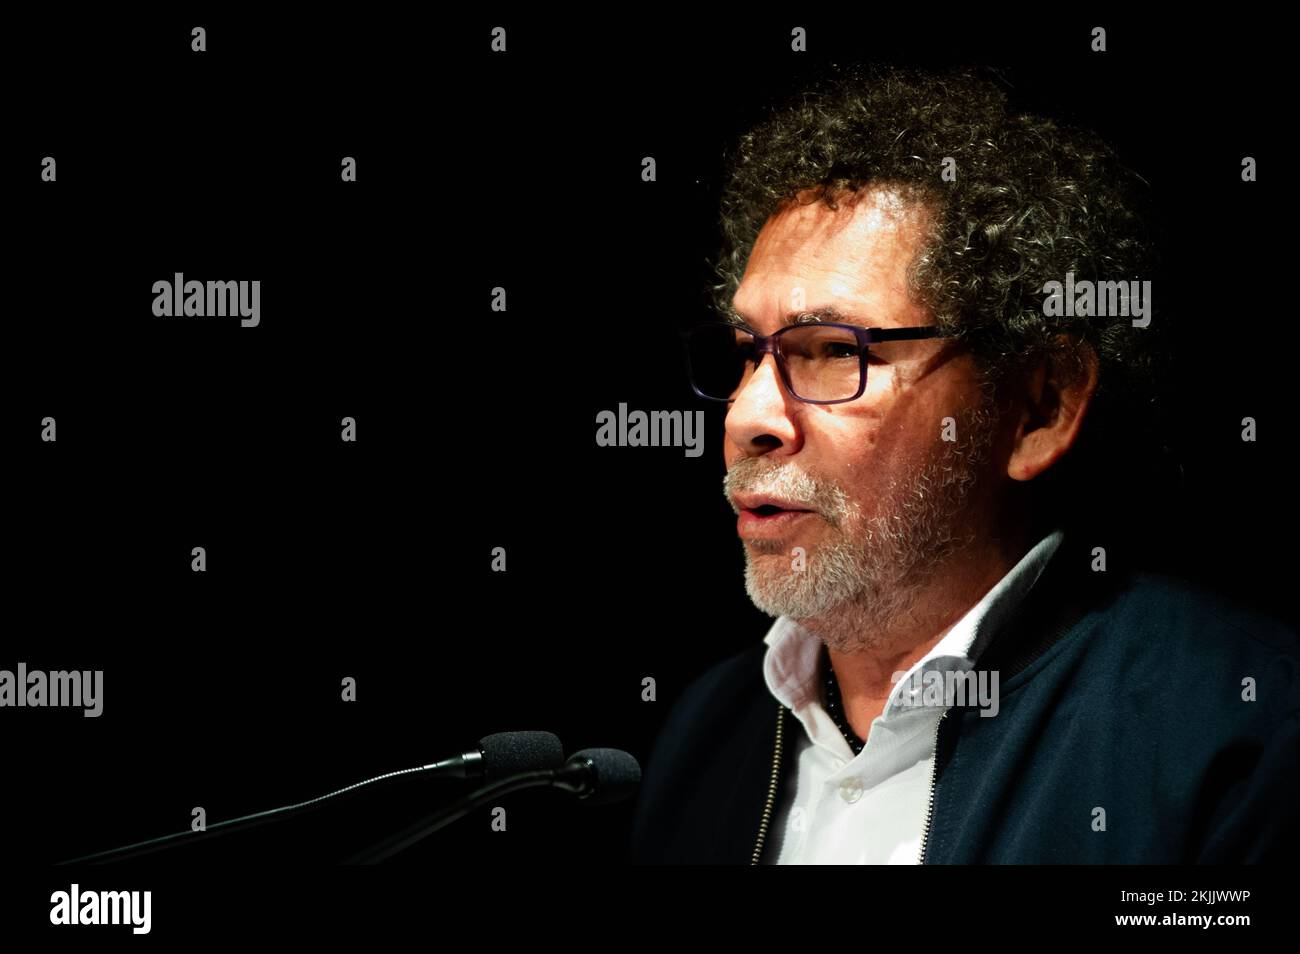 Former FARC-EP Guerrilla commander Pastor Alape speaks during the sixth anniversary of the signing of Colombia's Peace Agreement between the Colombian government and former guerrilla group FARC-EP. Photo by: Chepa Beltran/Long Visual Press Credit: Long Visual Press/Alamy Live News Stock Photo